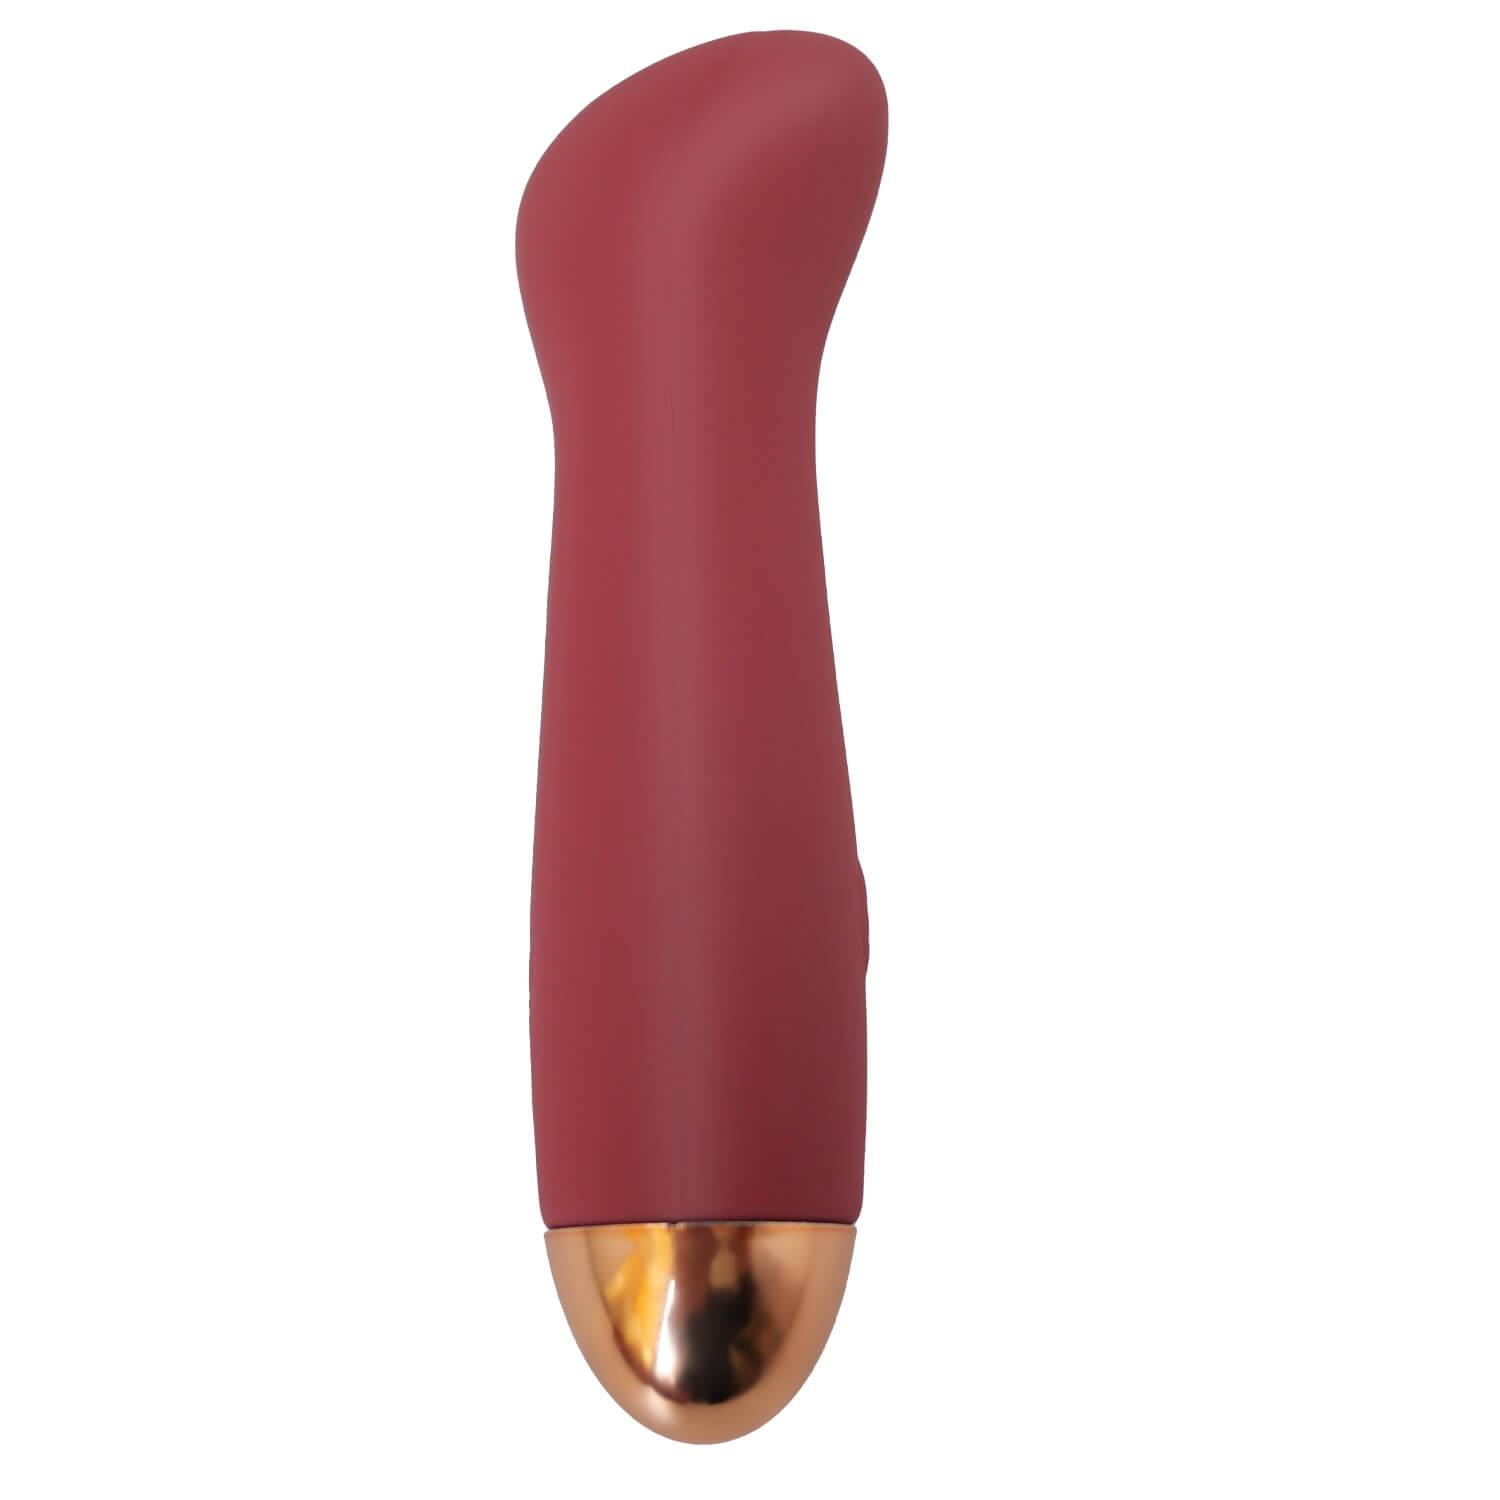 Red Bullet Vibrator with gold ring